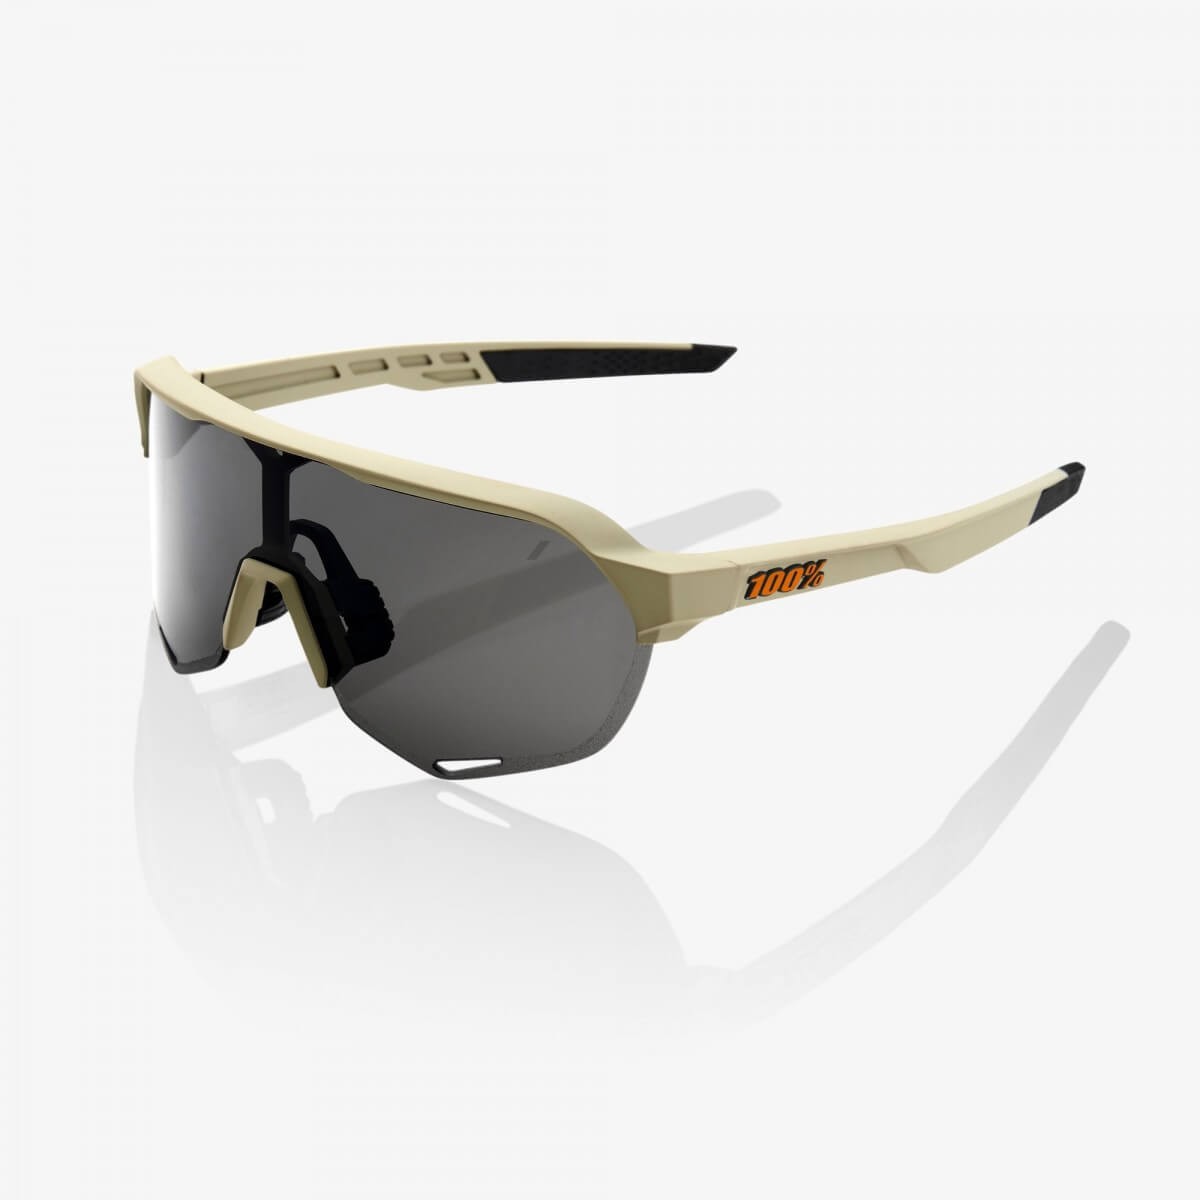 100% S2 Soft Tact Treibsandbrille - Smoked Lens